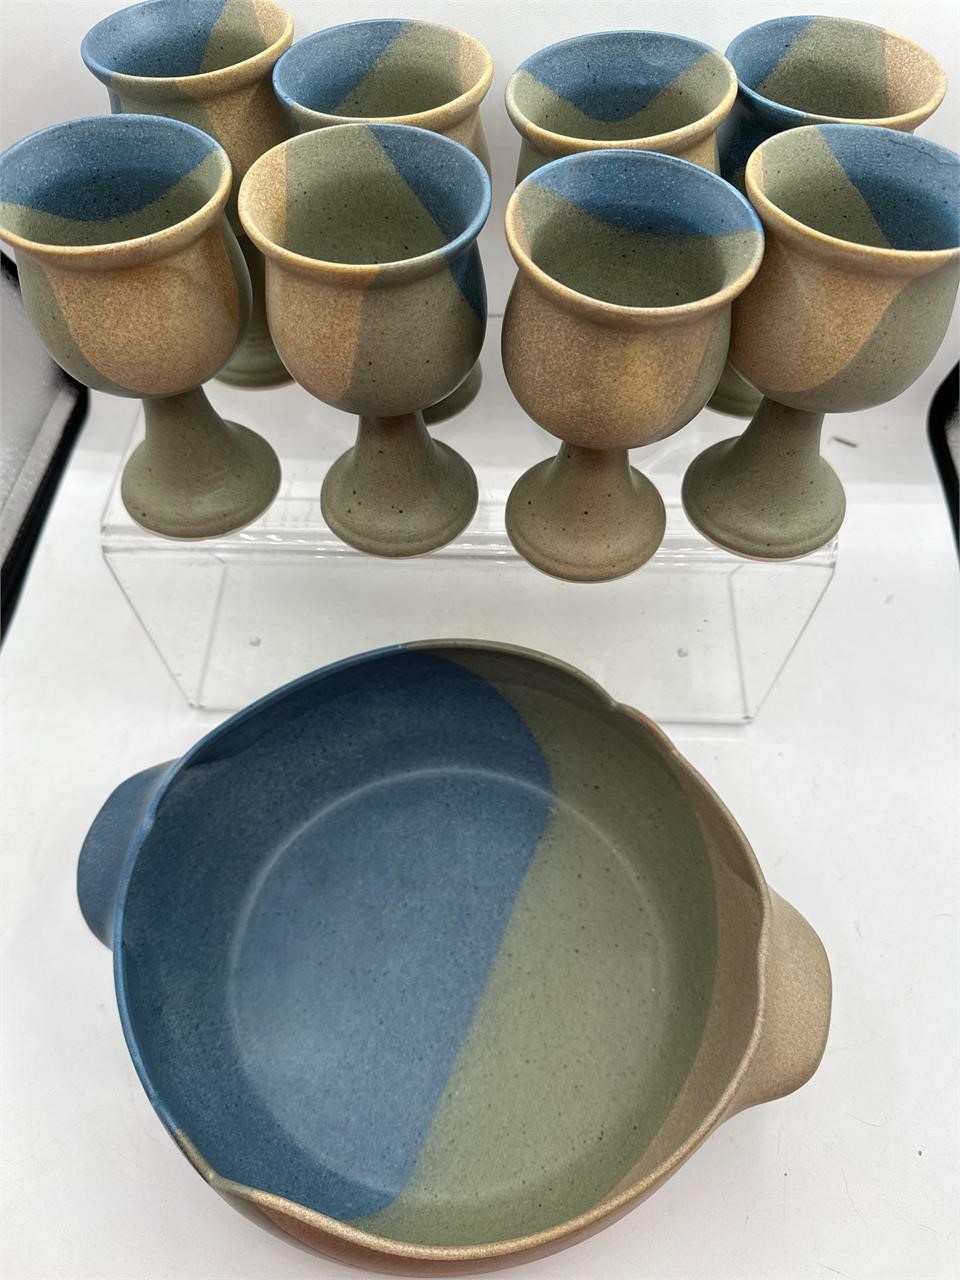 Pottery bowl with goblets